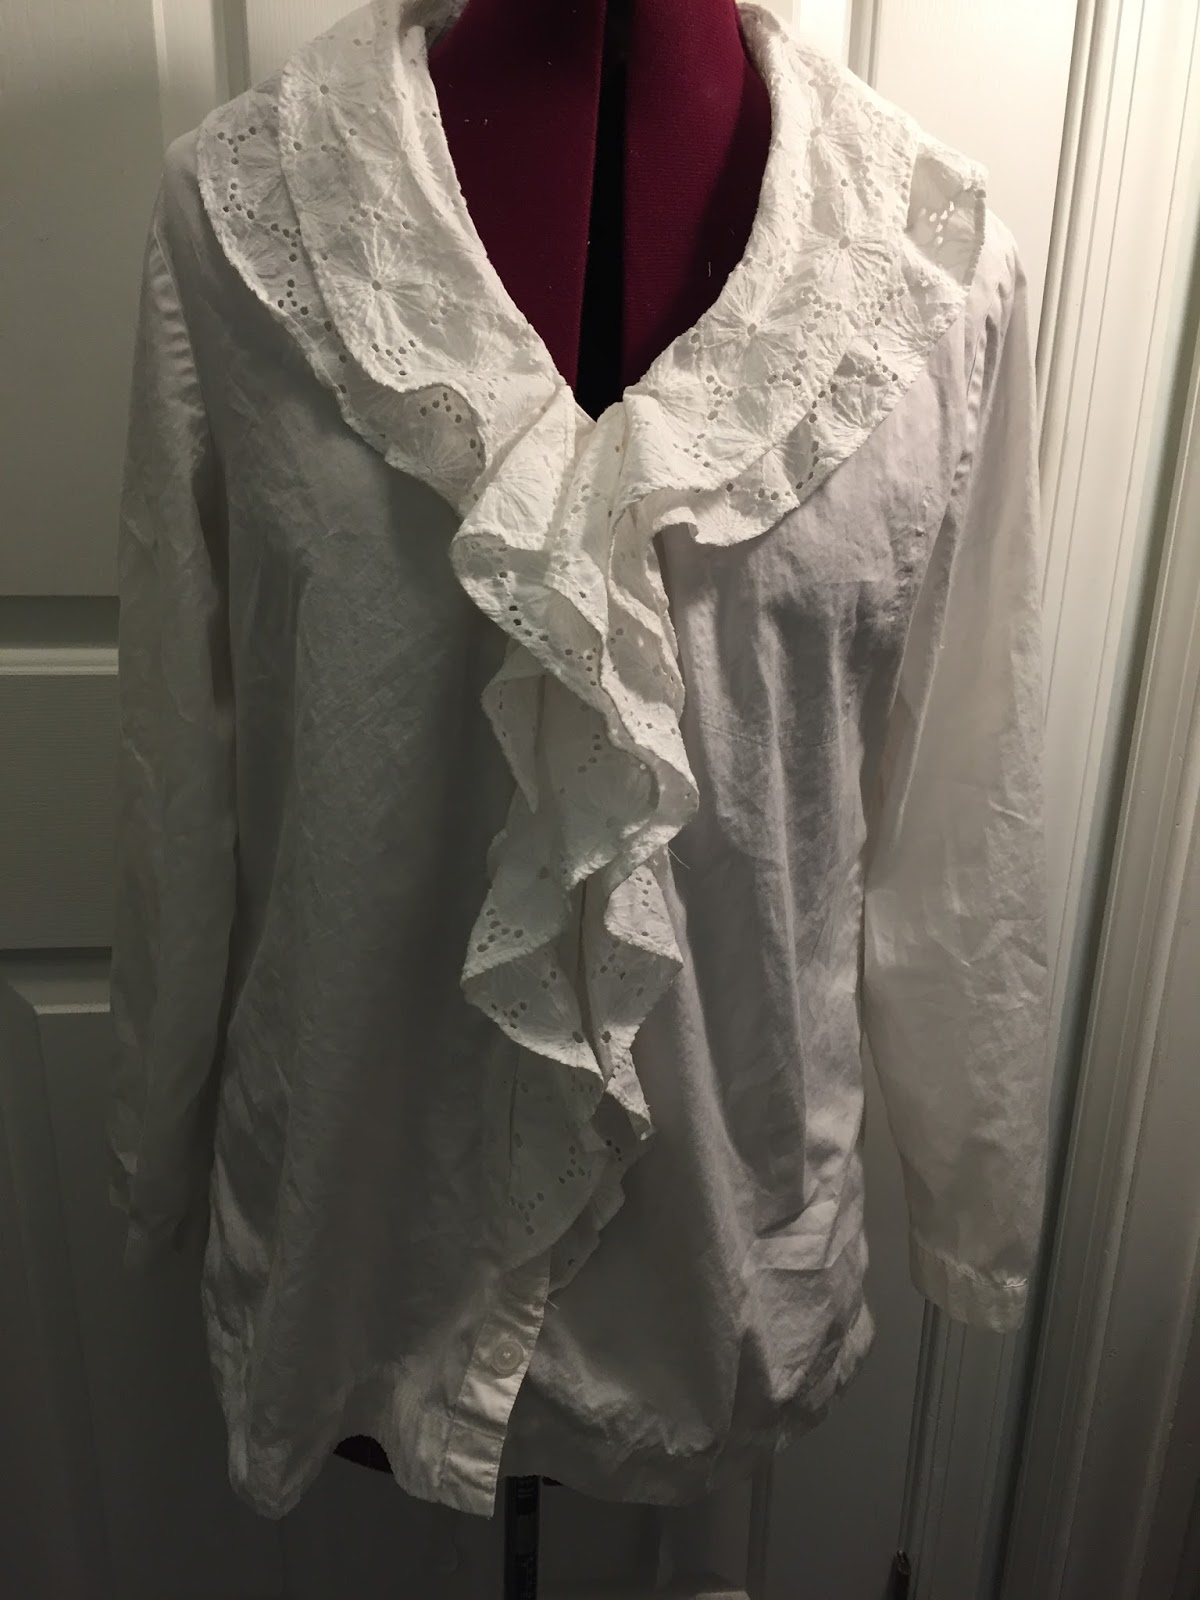 Refashioning a White Button Front Shirt with a Ruffled White Eyelet Collar